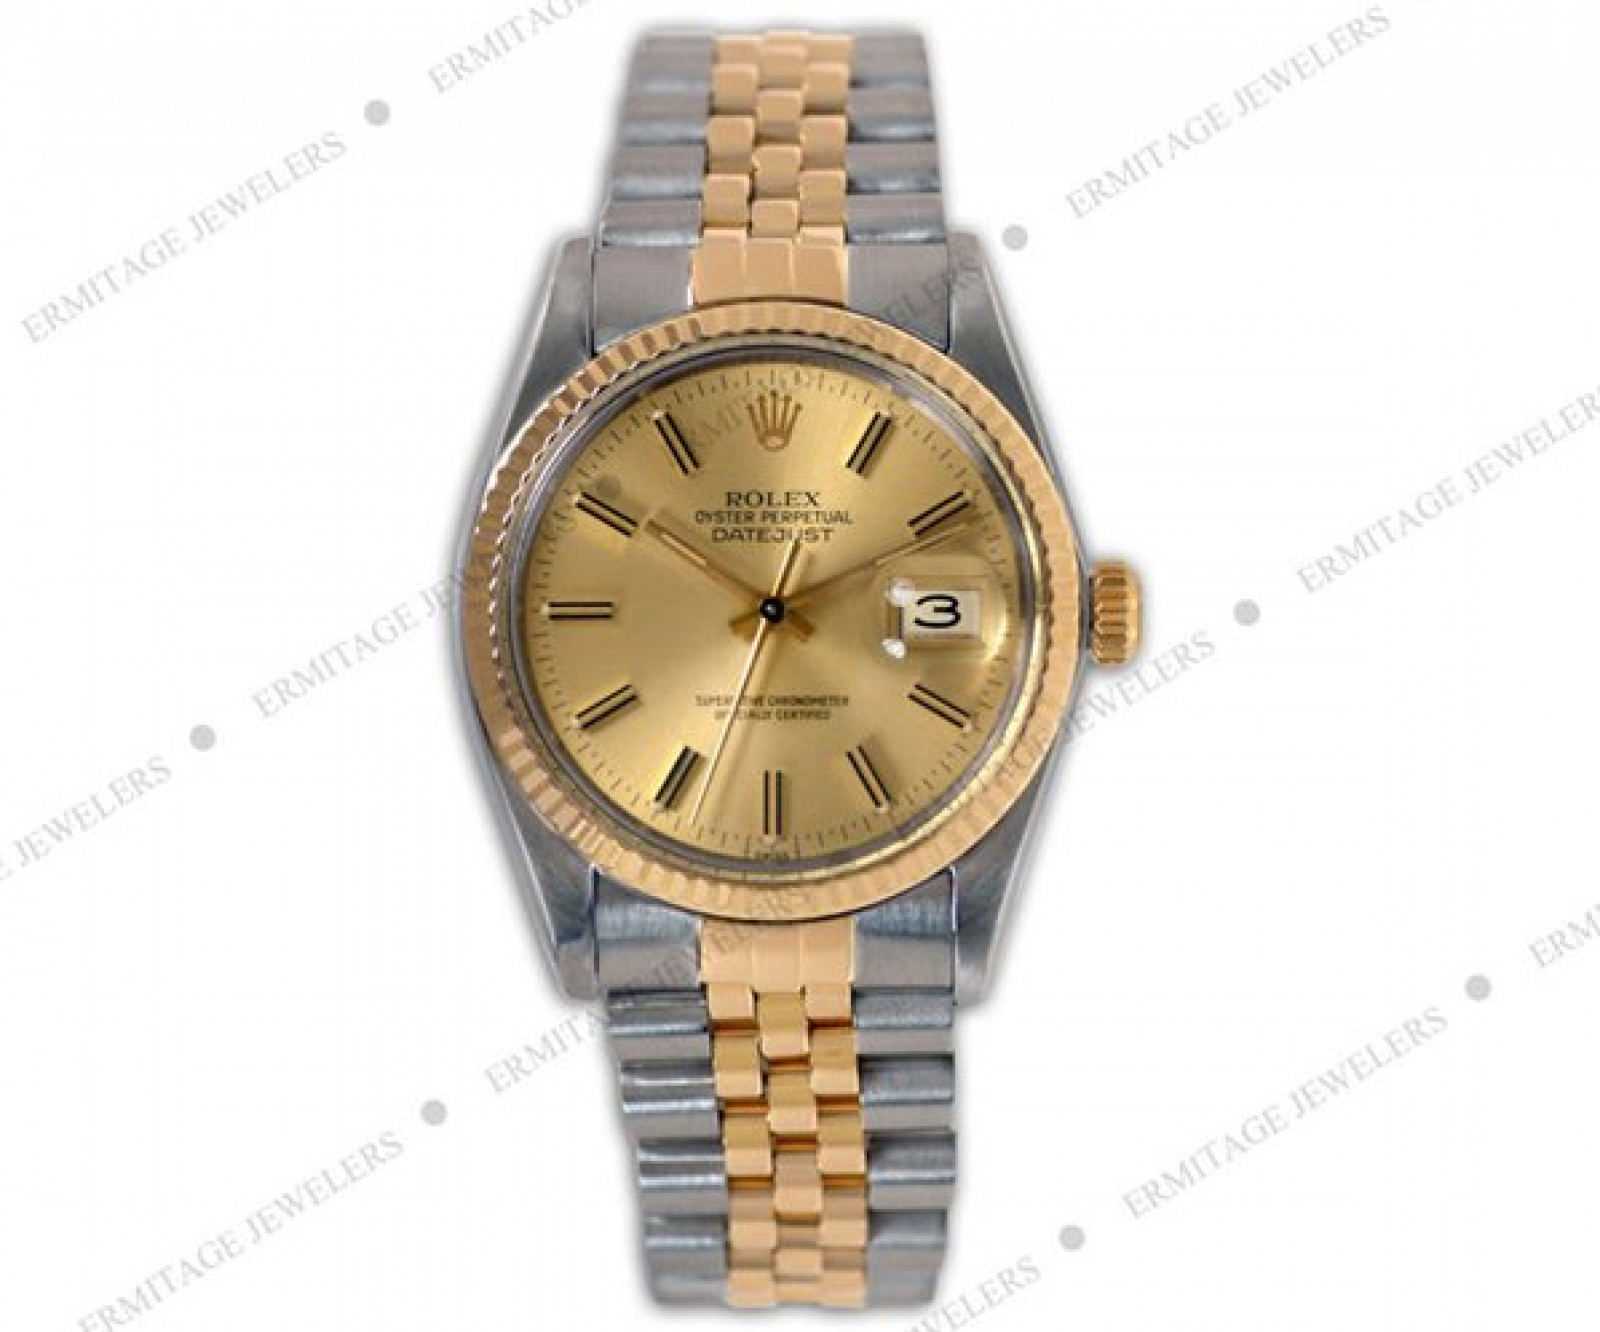 Sell Rolex 16013 Men's Datejust | Ermitage Jewelers